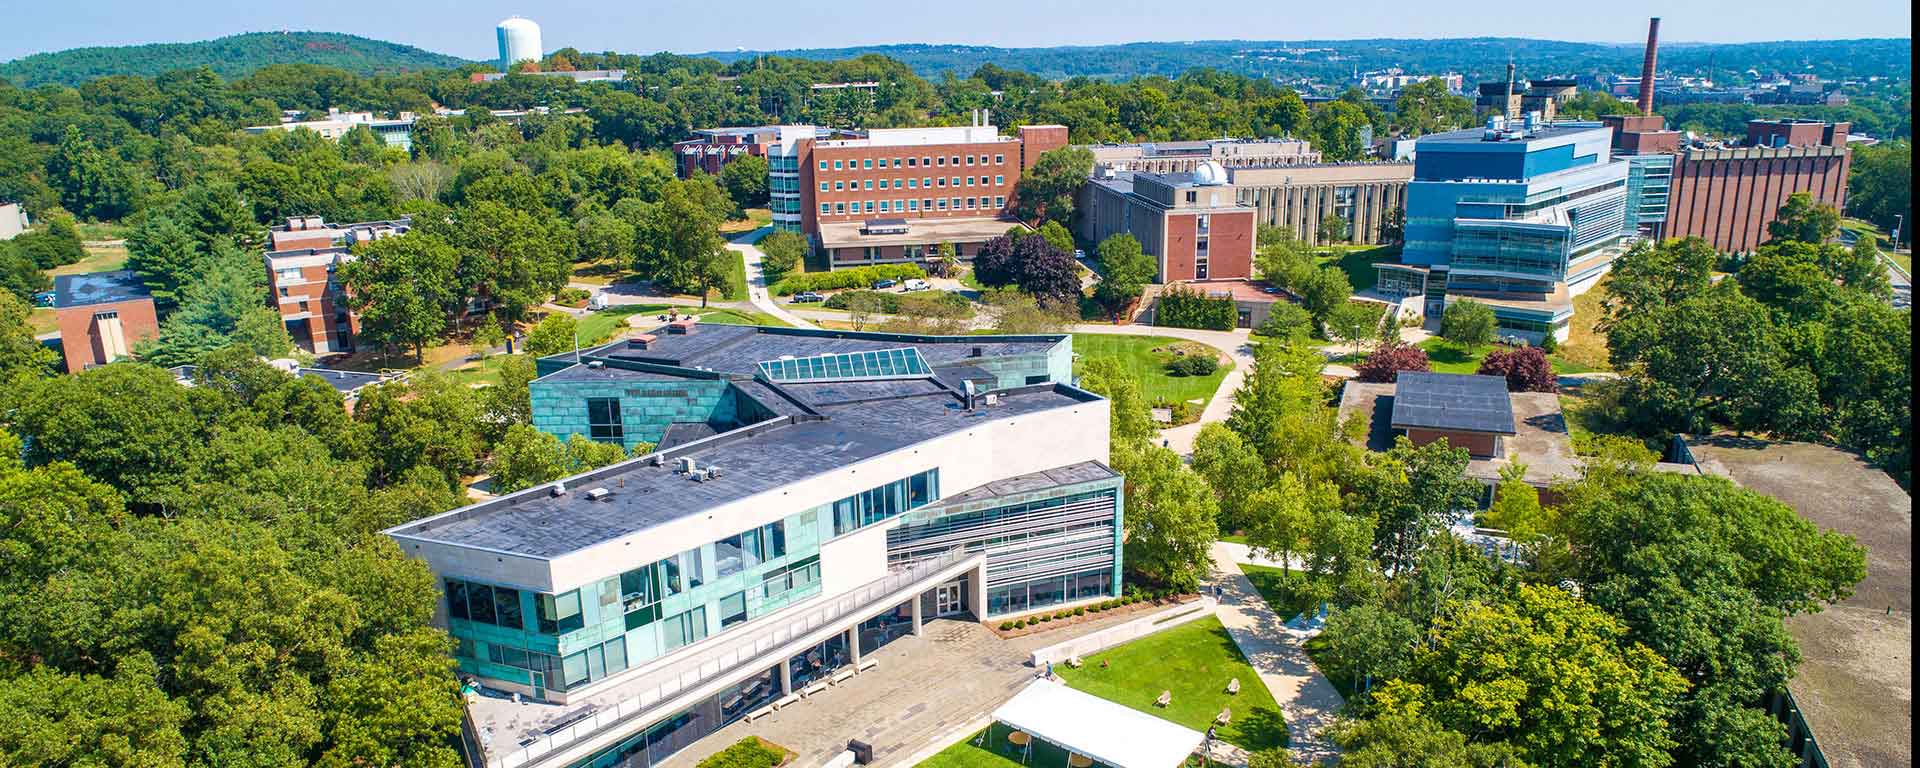 Aerial view of the Brandeis campus